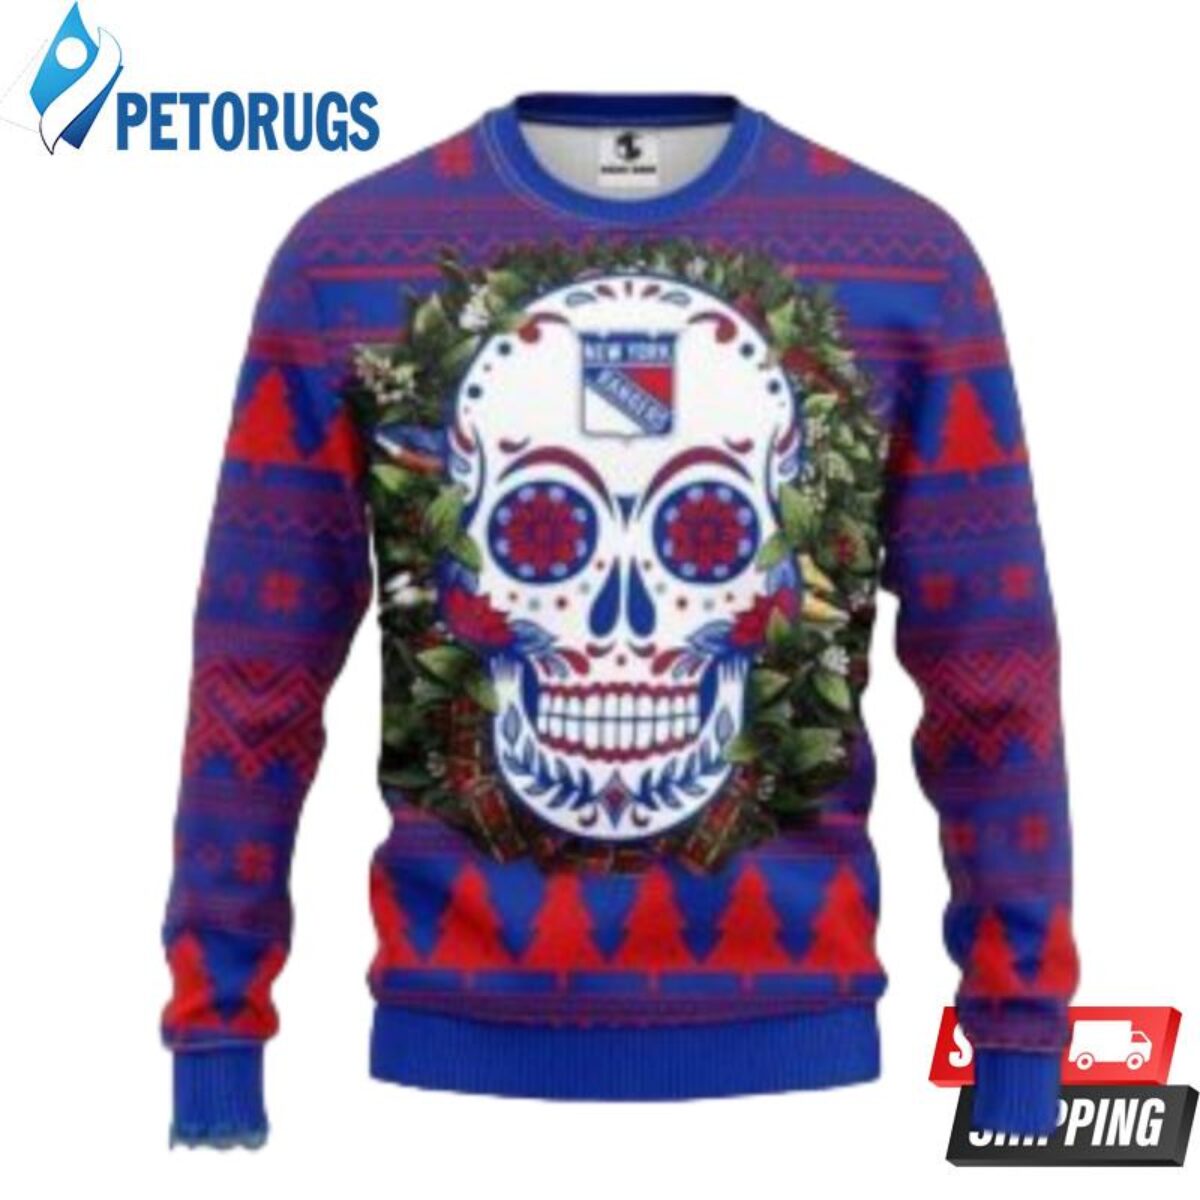 NFL NHL and College Team Ugly Christmas Sweaters – Ugly Christmas